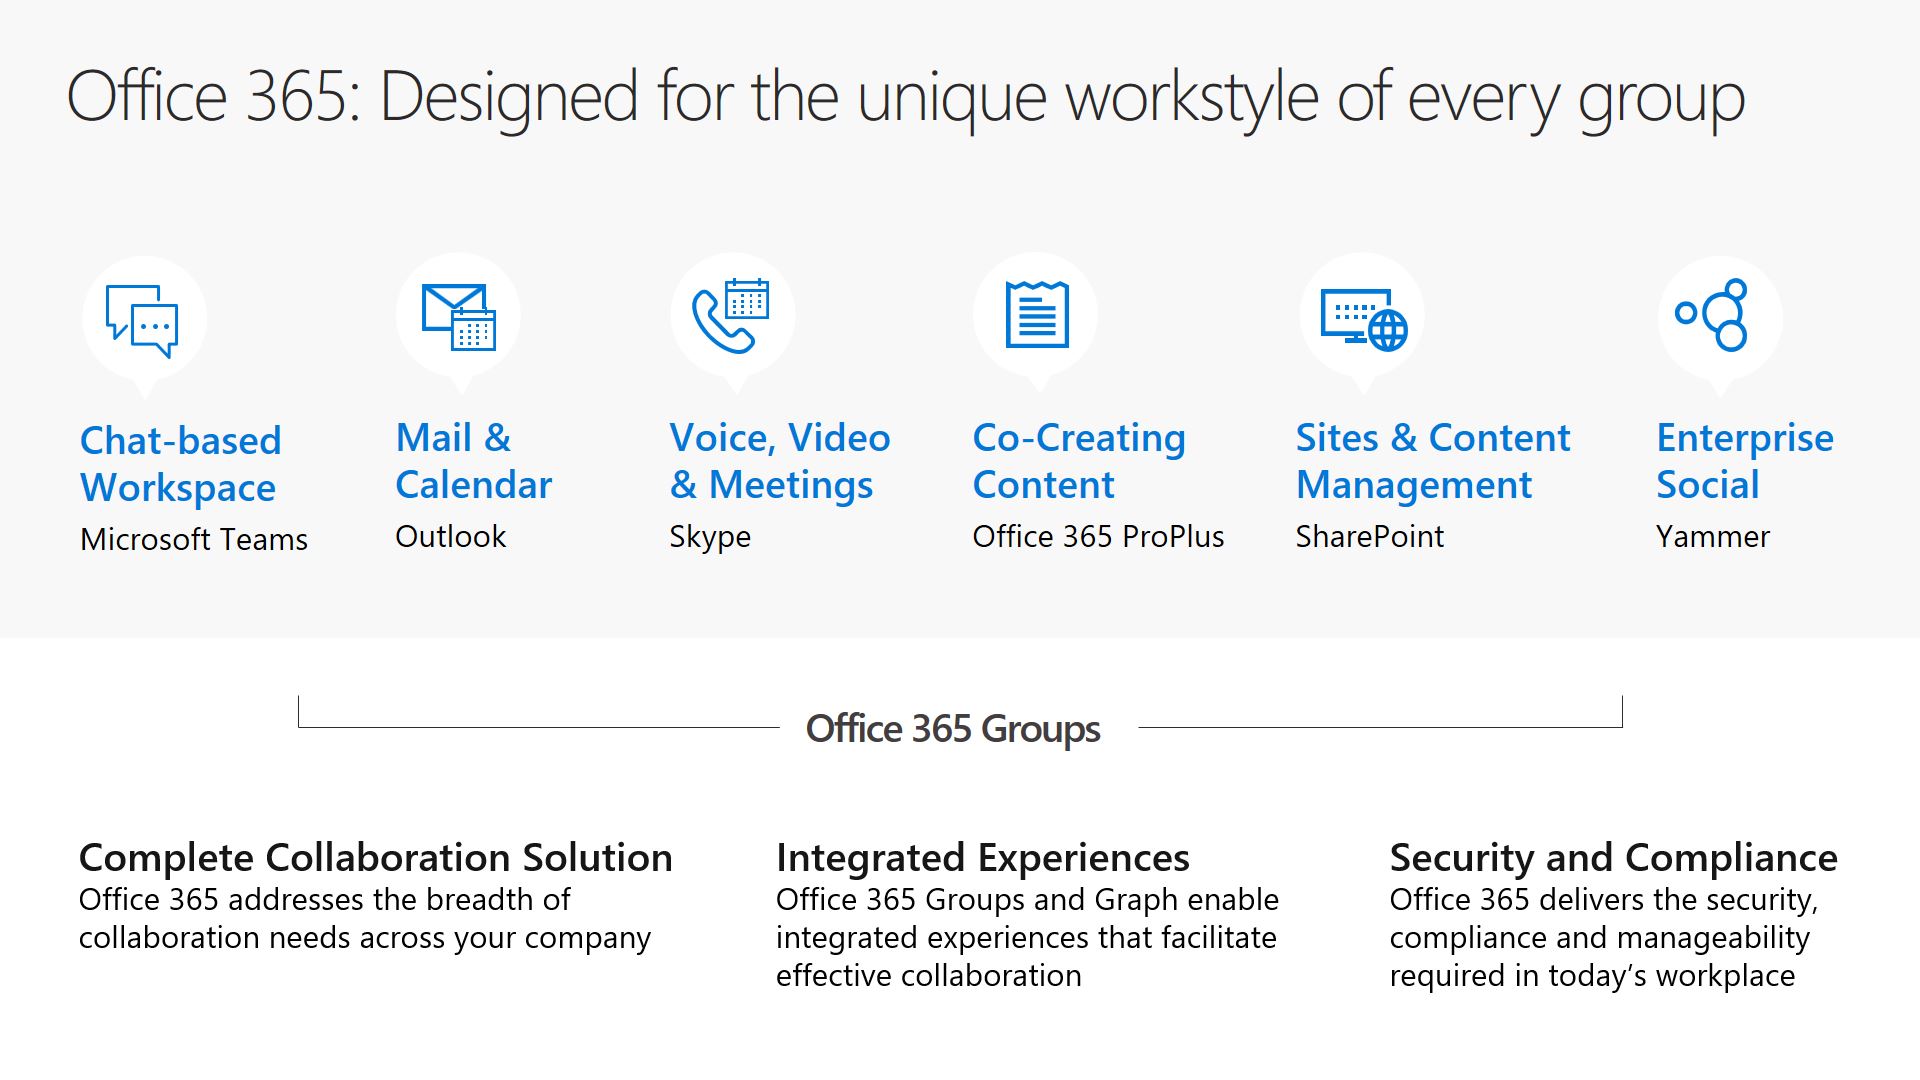 What are Office 365 Groups